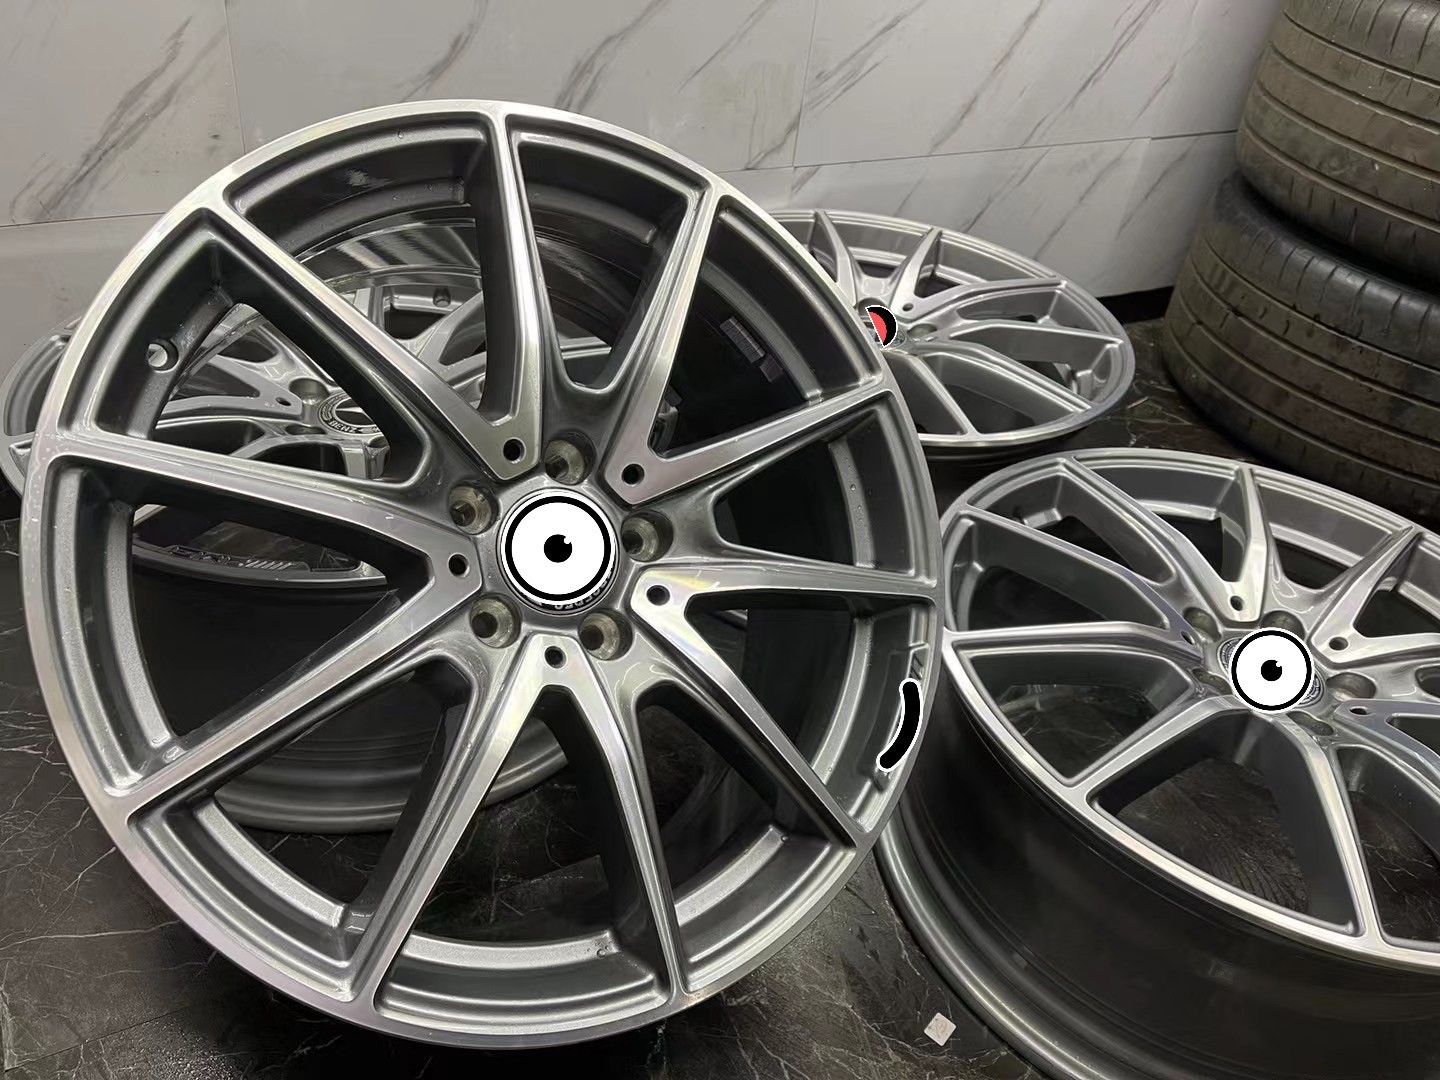 Wholesale Amg 19 Inch Rim Set E Class 10-Spoke-Design Genuine Mercedes-Benz from china suppliers